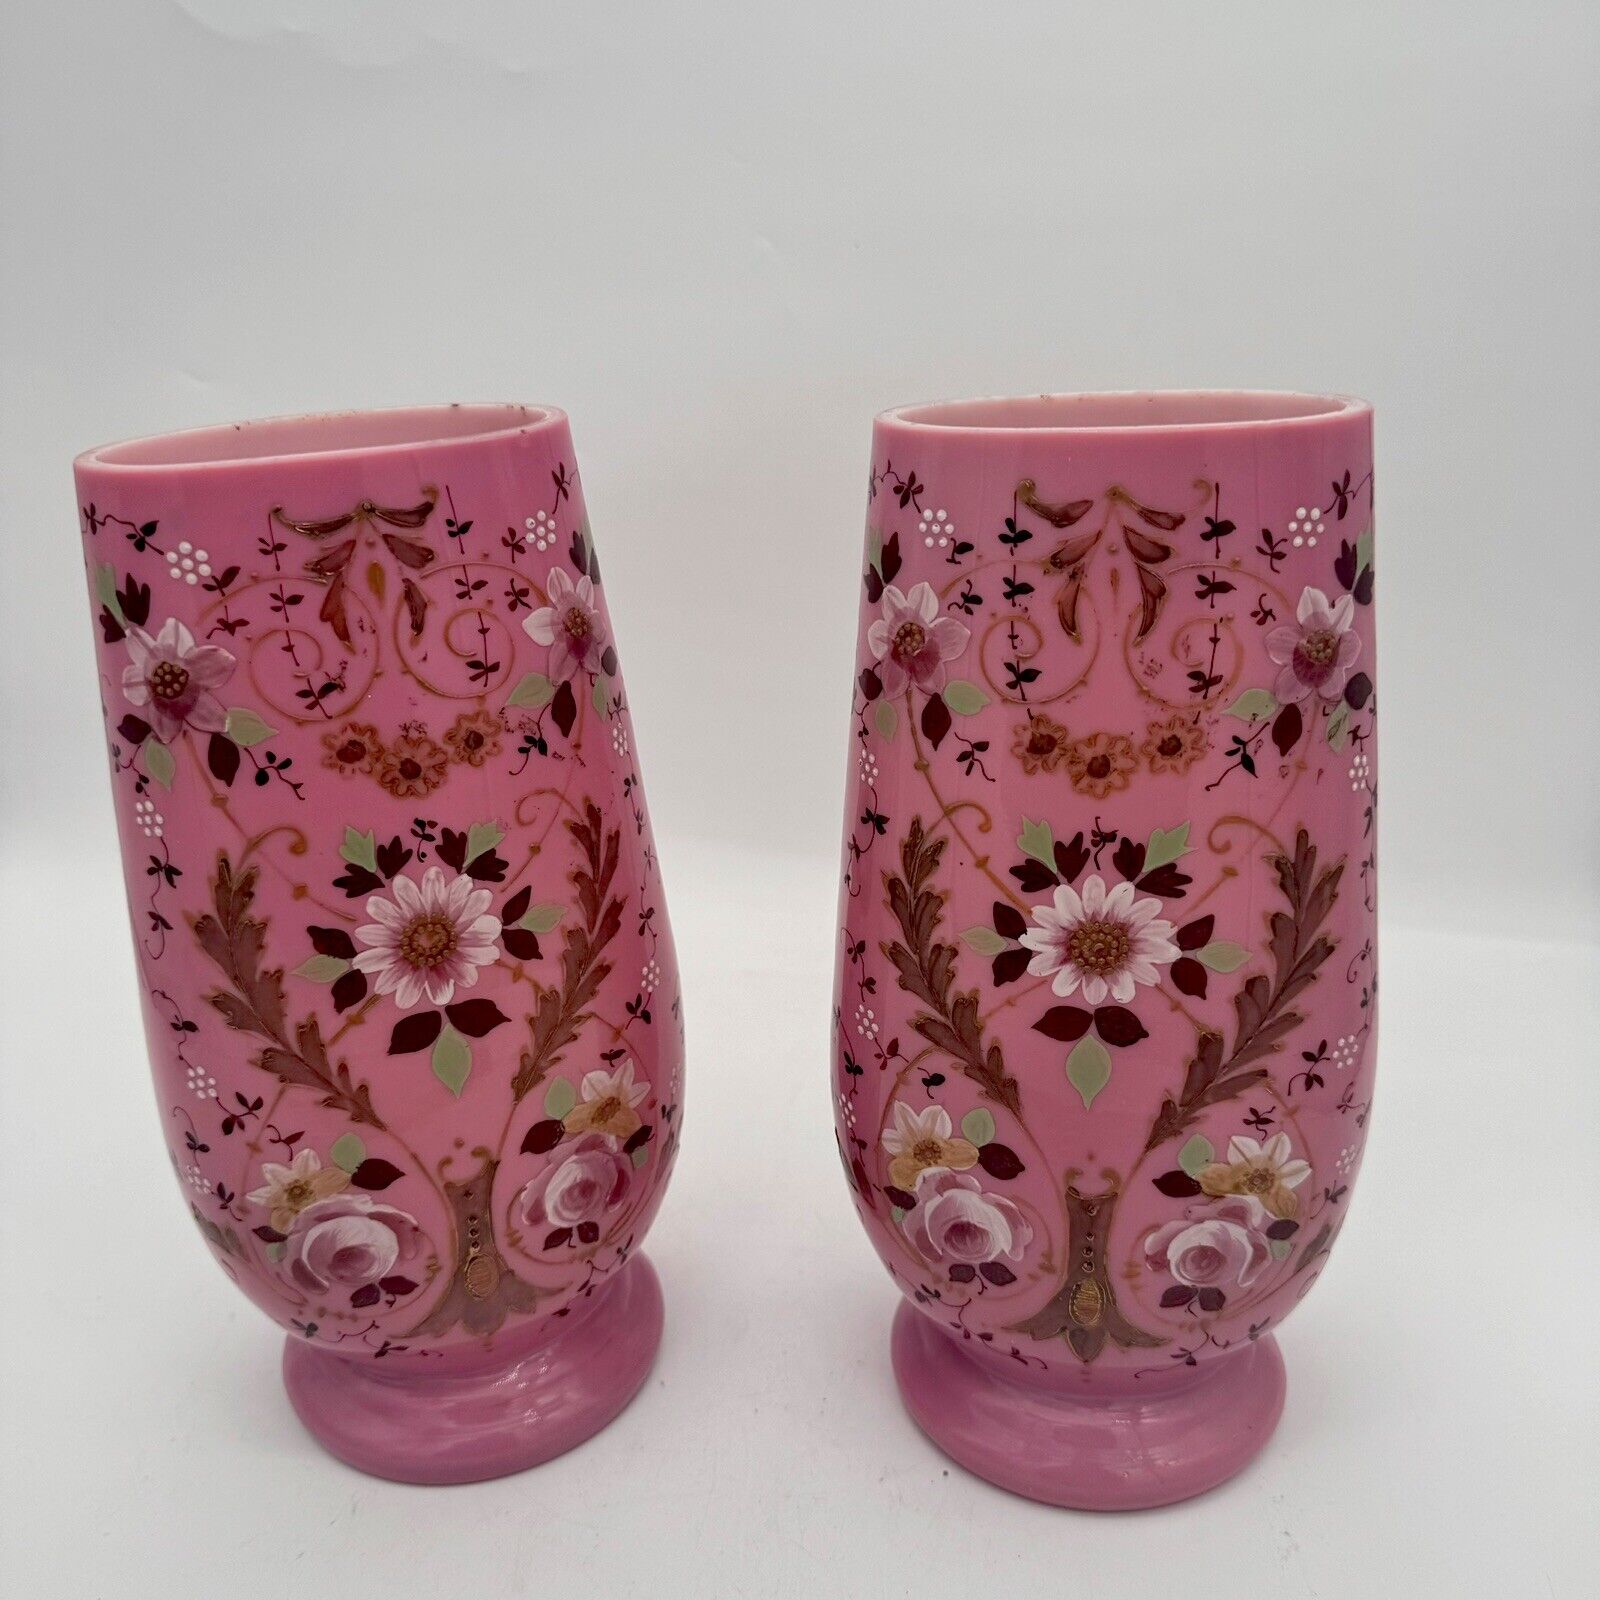 19C Opaline Pink Bristol Glass 2 Vases Enameled With Leaves Flowers 11.5” R